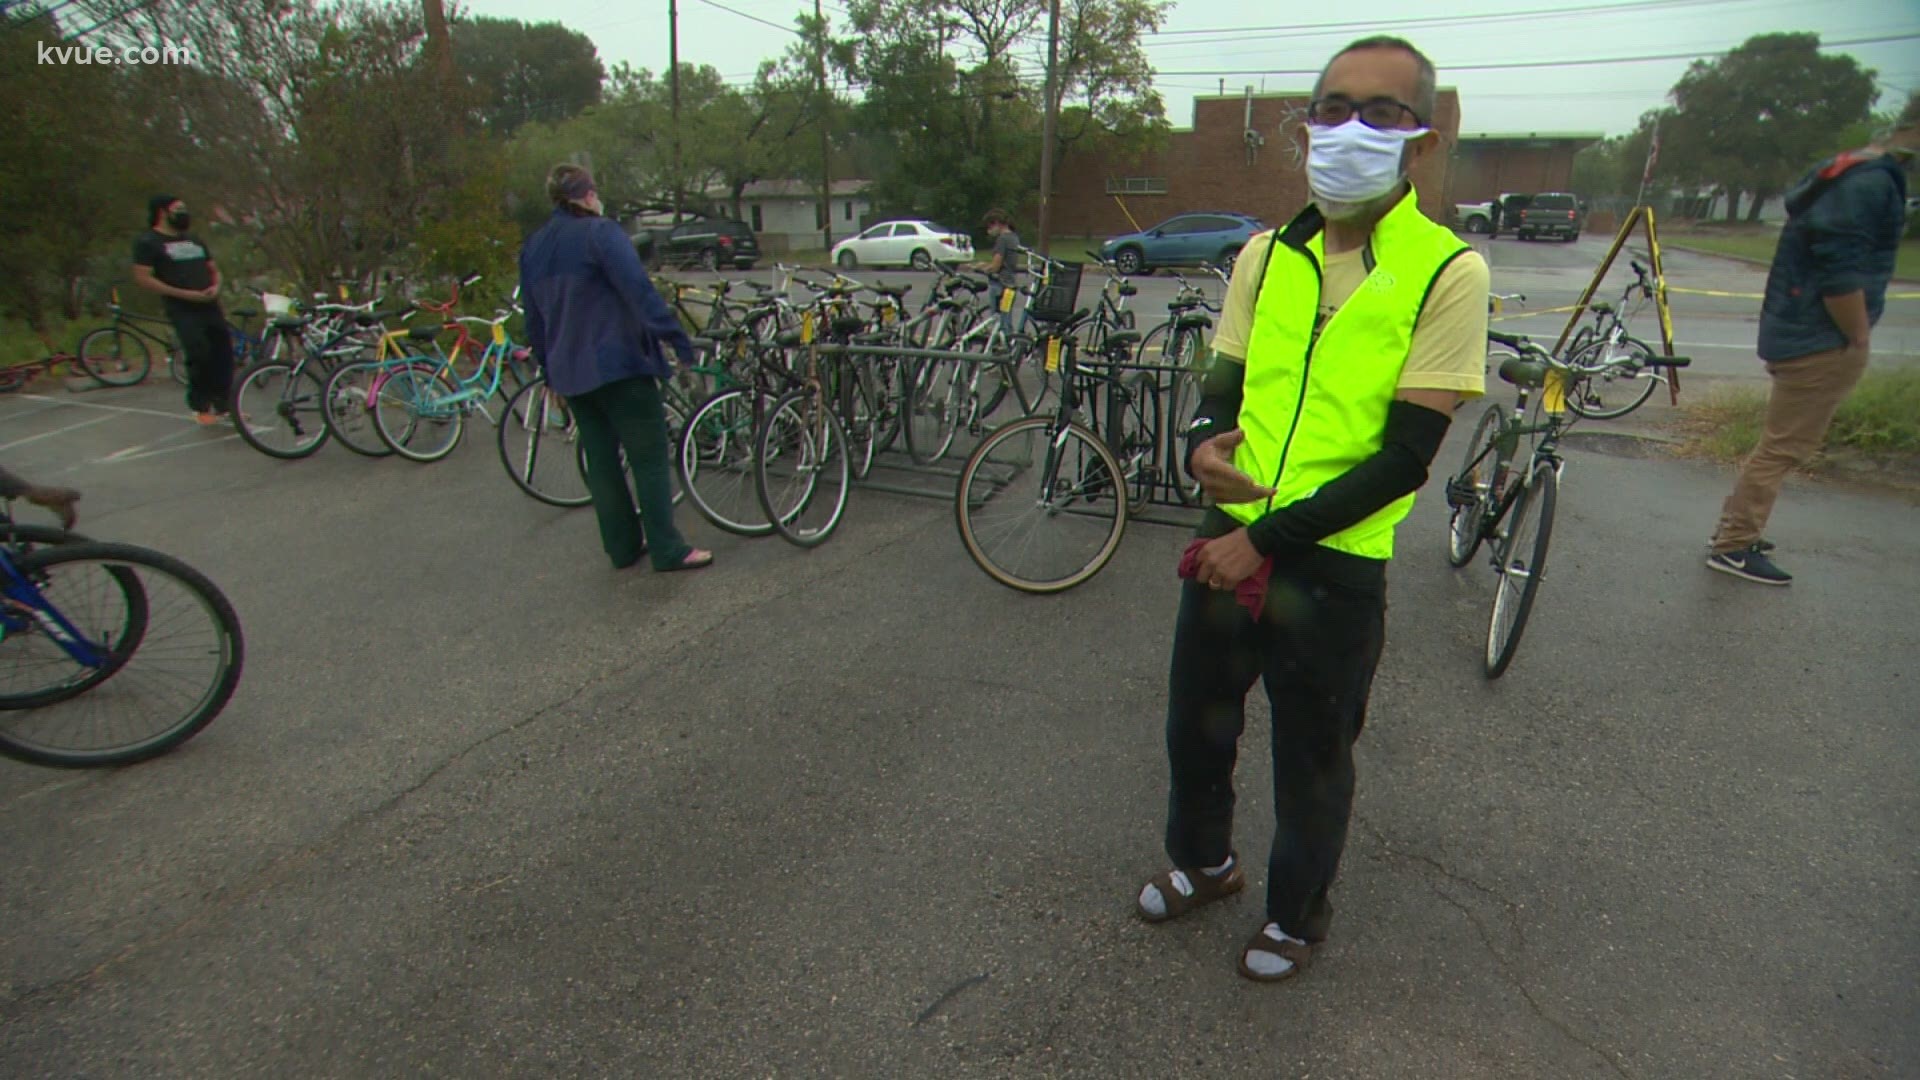 Volunteers with the Yellow Bike Project in Austin are refurbishing bicycles amid a shortage. KVUE spoke with one of the volunteers.